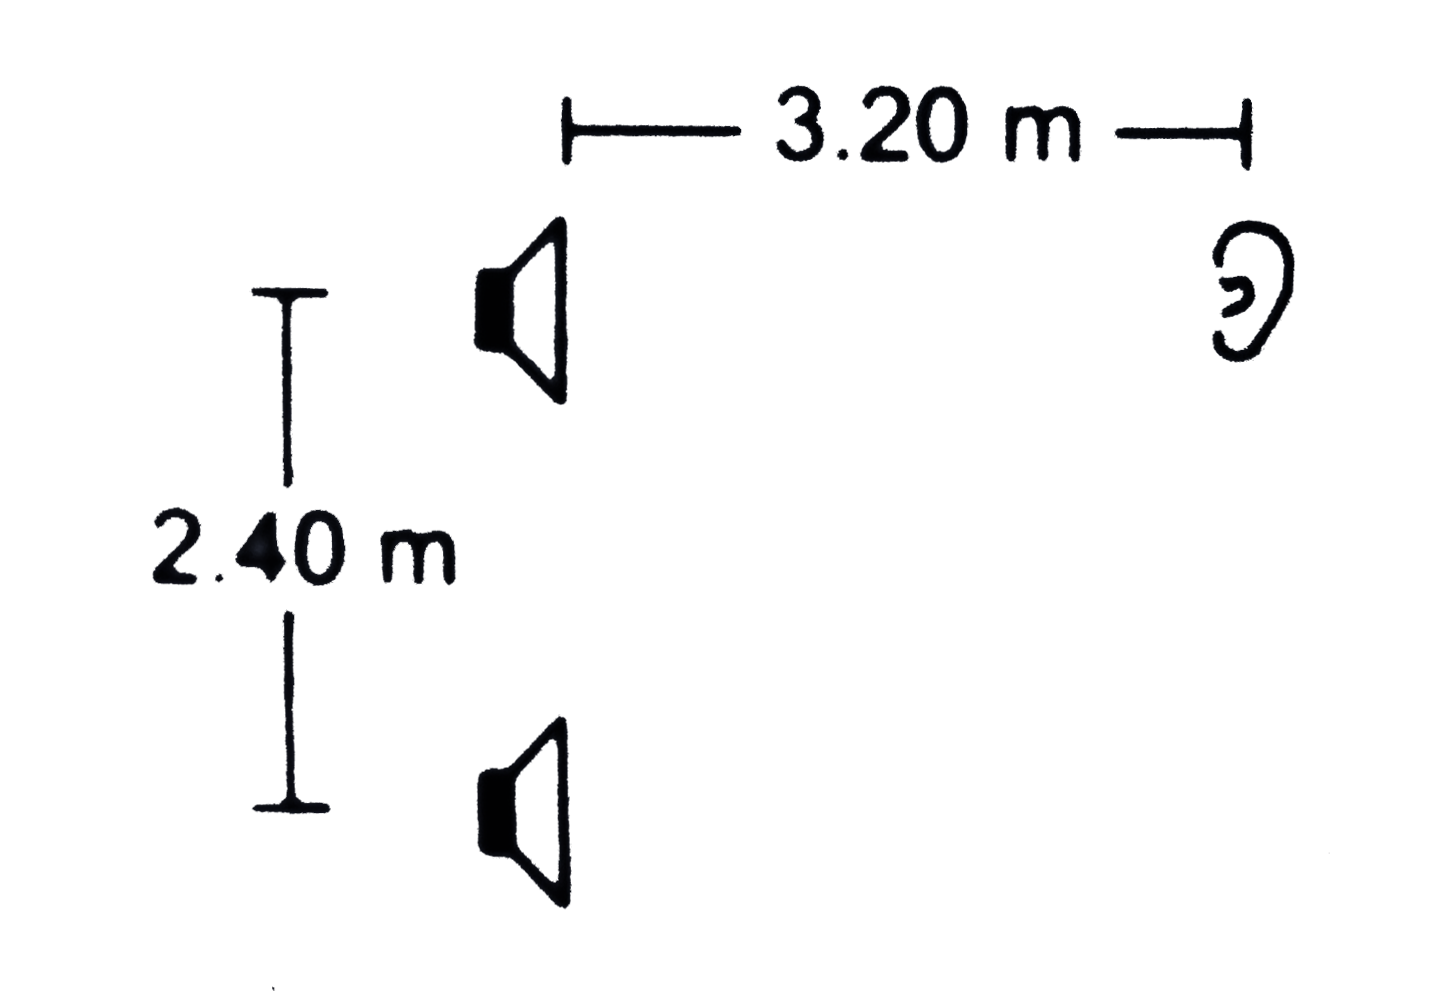 Two stereo speakers are separated by a distance of 2.40 m. A person stands at a distance of 3.20 m directly in front of one of the speakers as shown in figure. Find the frequencies in the audible range (20-2000 Hz) for which the listener will hear a minimum sound intensity. Speed of sound in air = 320 ms^-1